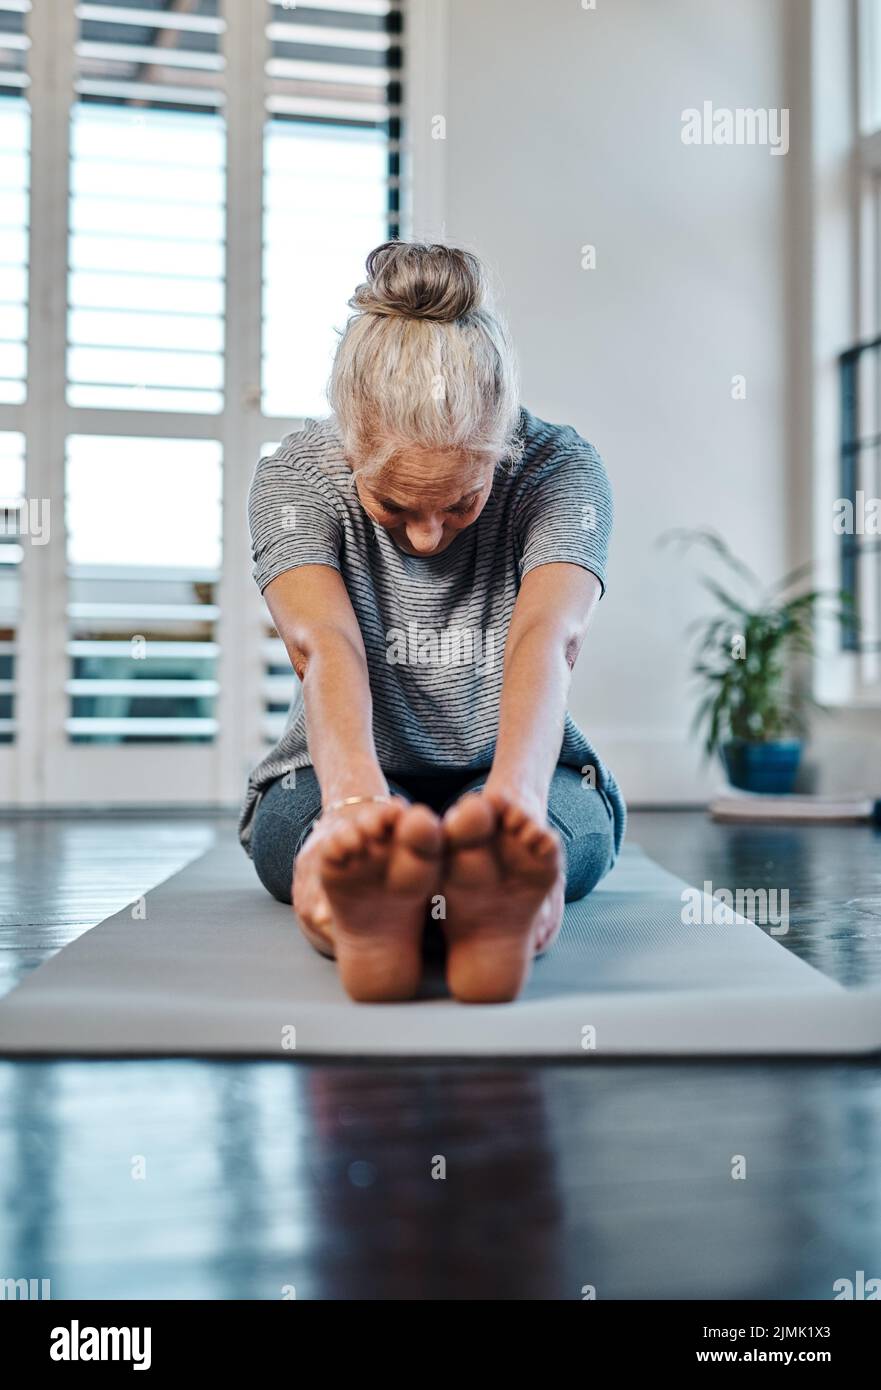 Just a little longer. a relaxed mature woman practicing yoga inside of a studio during the day. Stock Photo